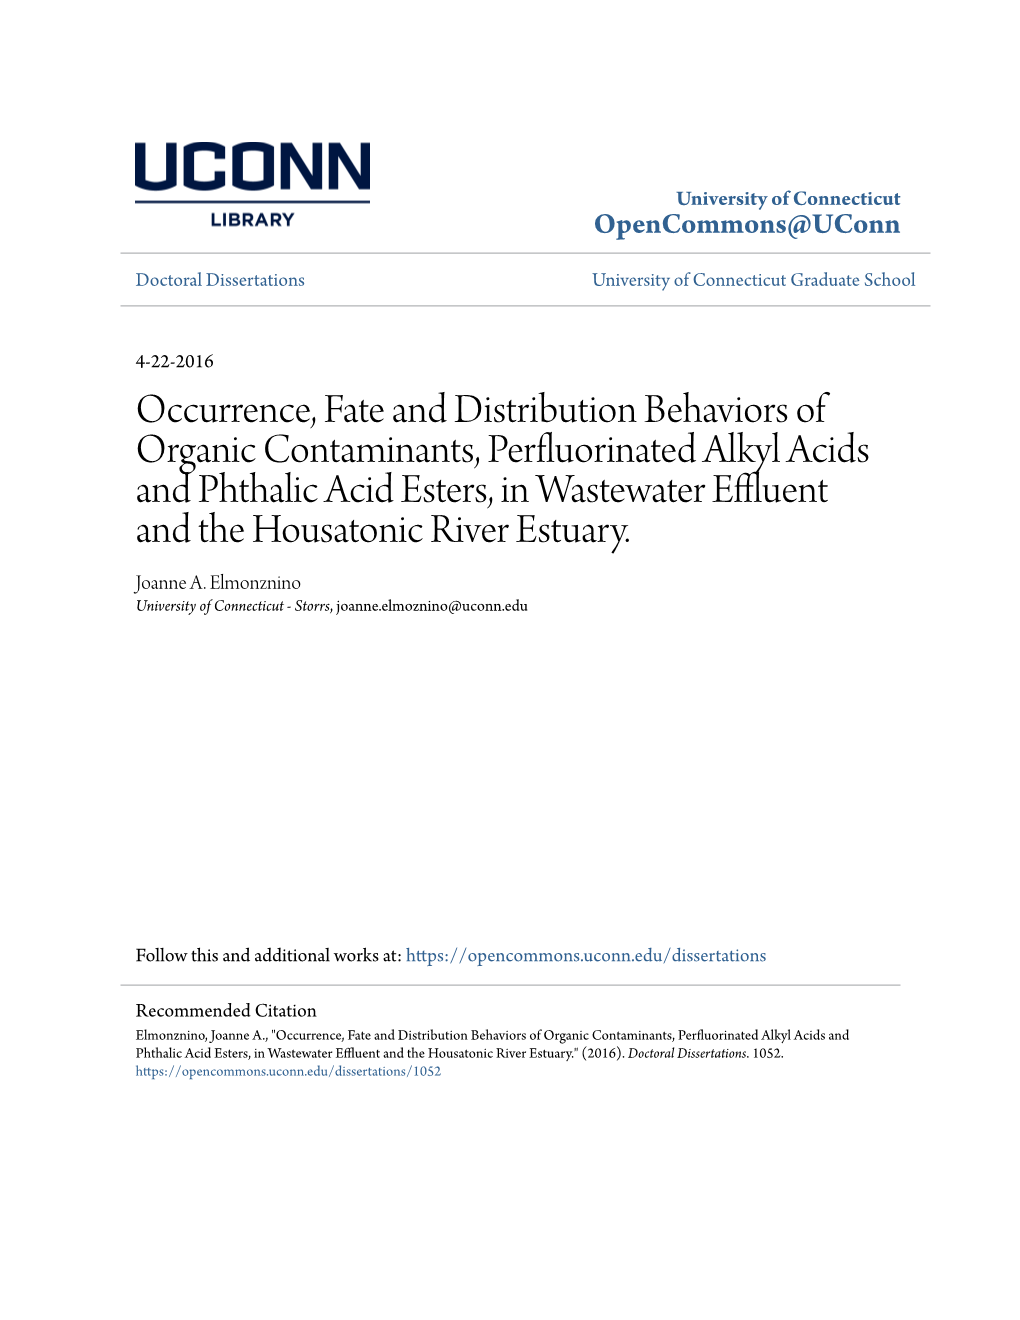 Occurrence, Fate and Distribution Behaviors of Organic Contaminants